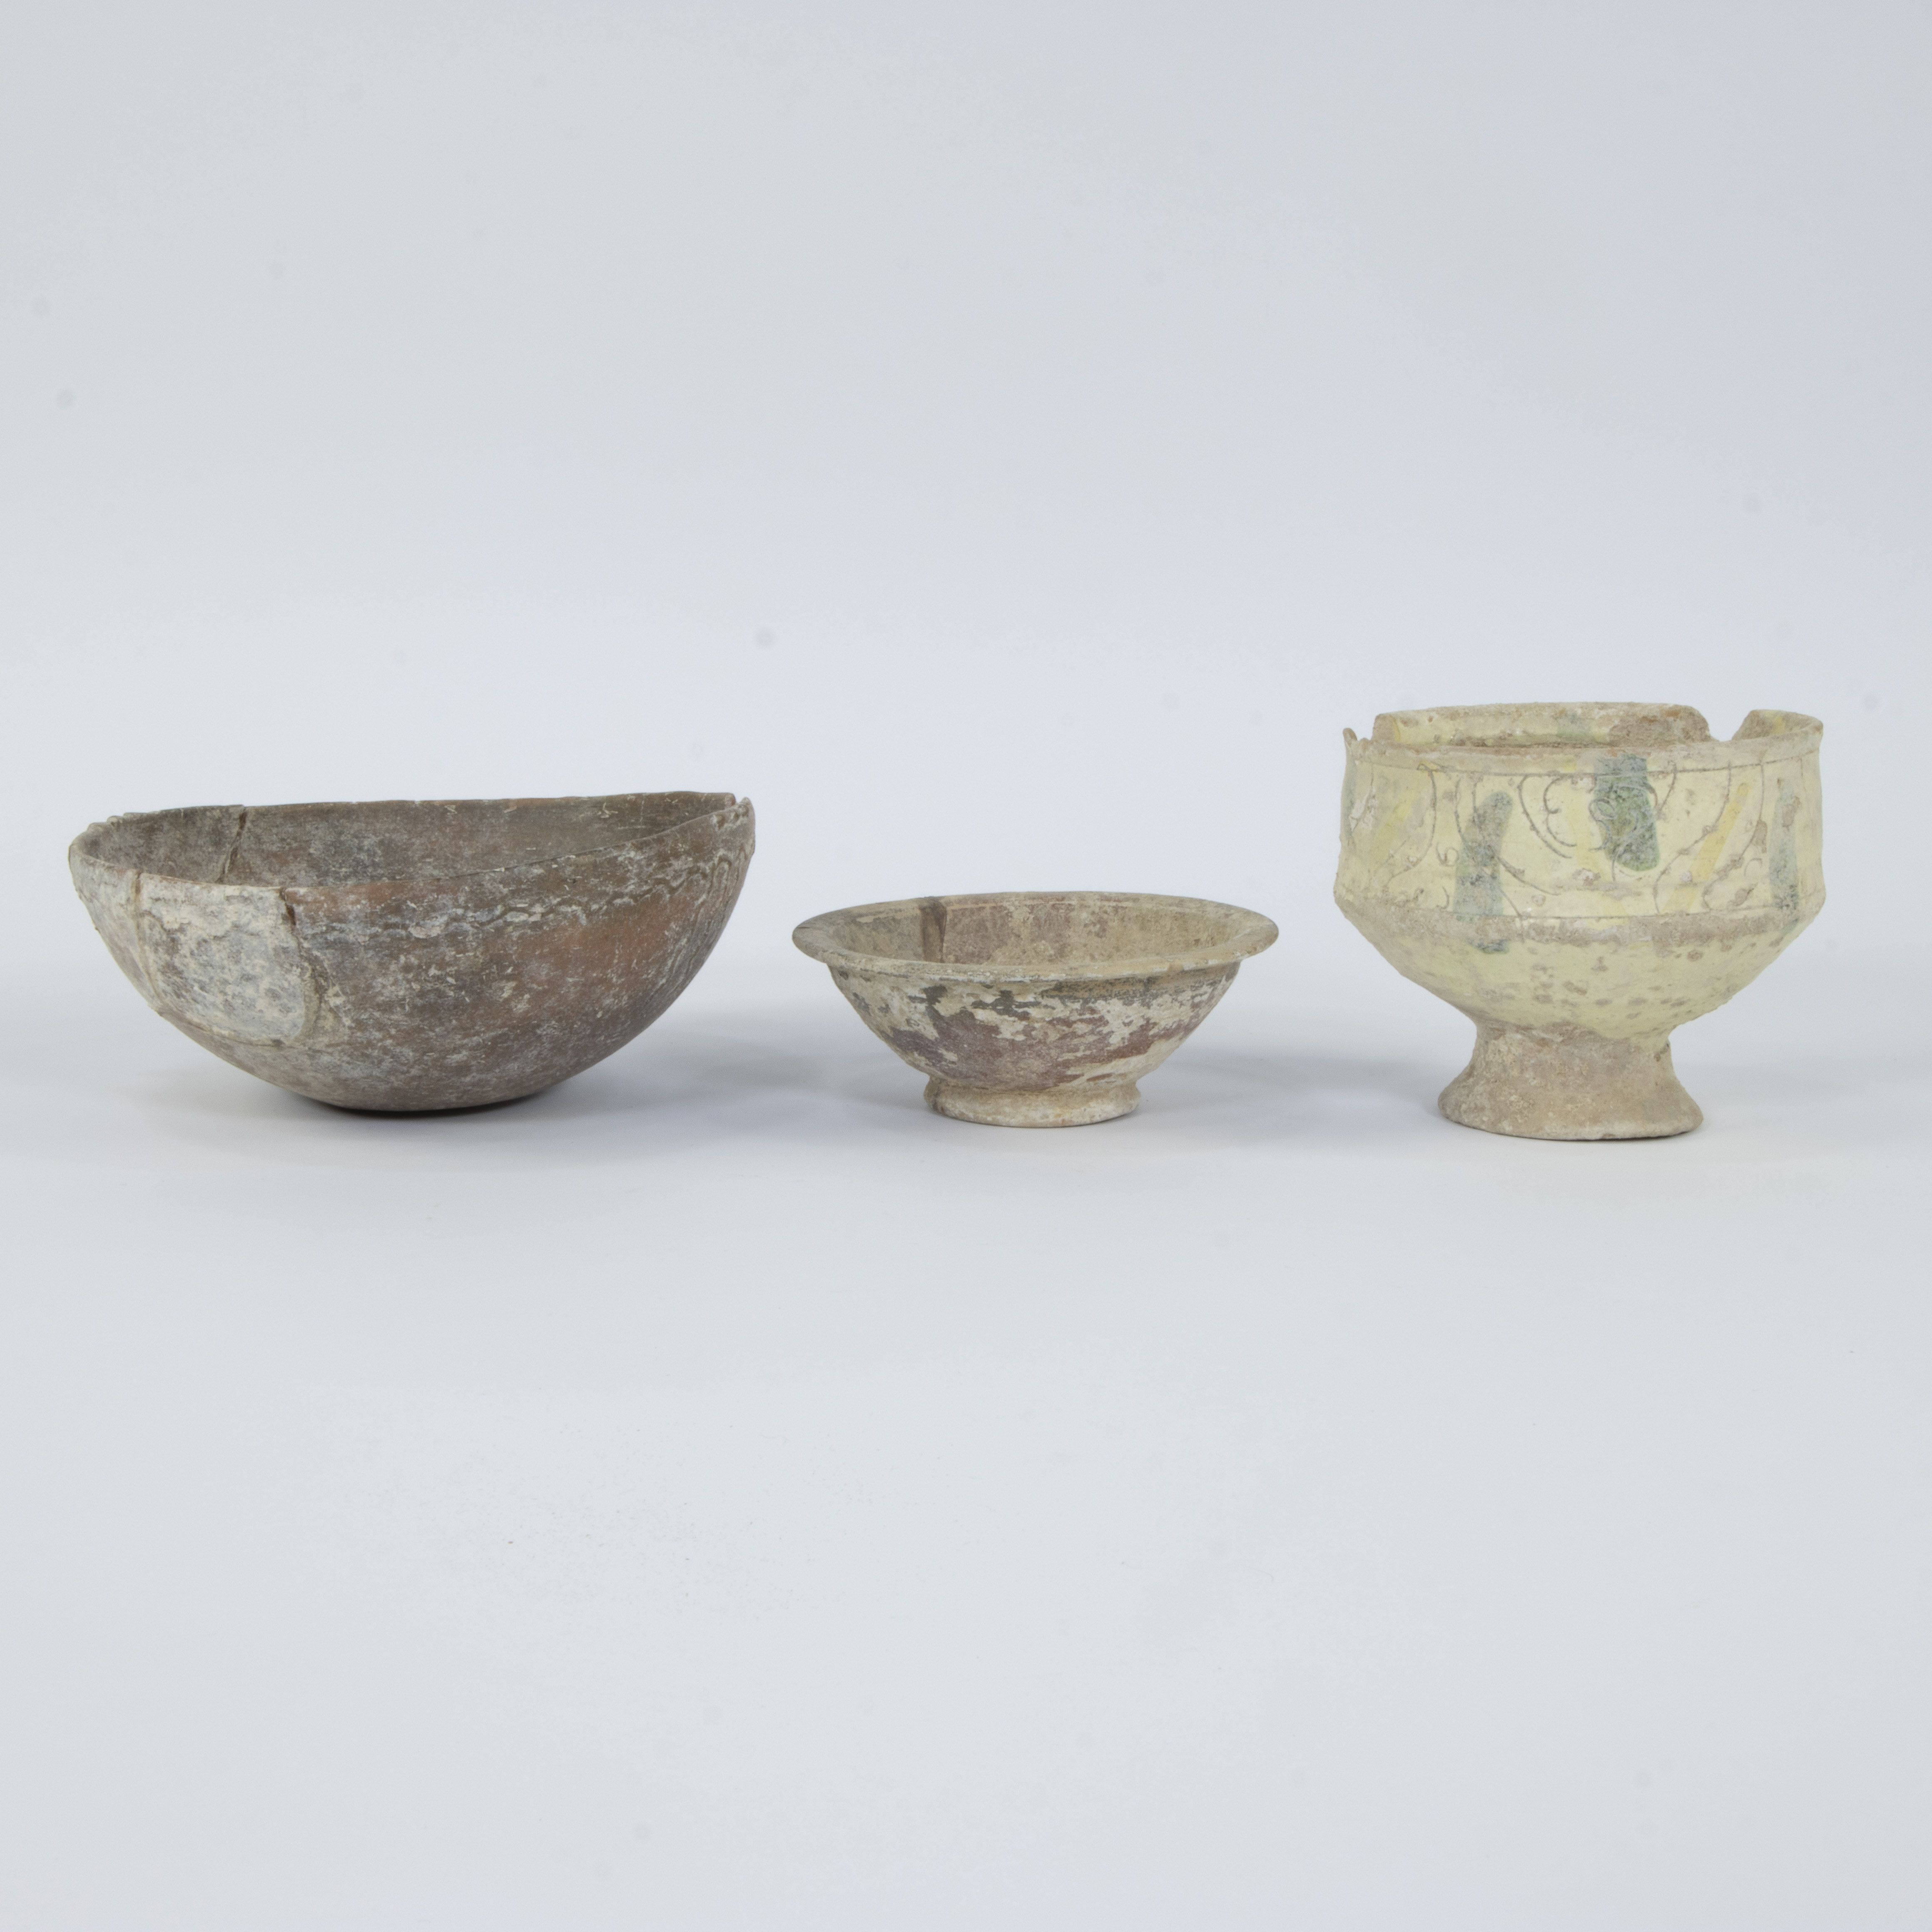 Pottery from ancient Greece, 2 bowls and a drinking cup